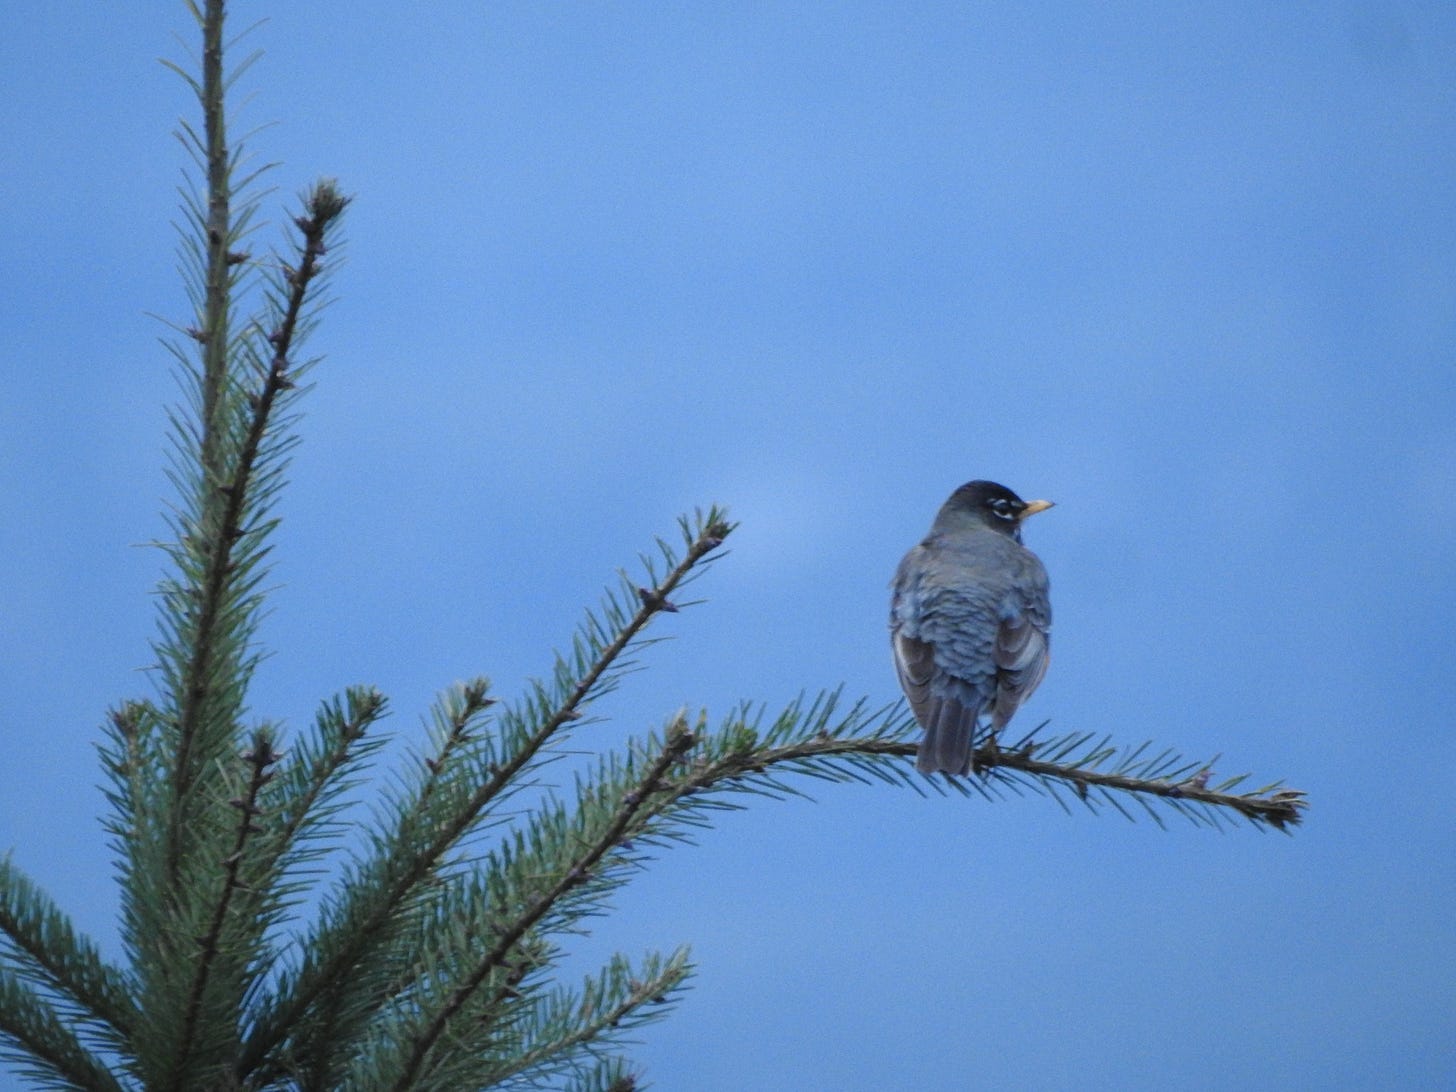 An American robin sits on a top branch of a young Douglas fir tree.  The background is a dusky blue sky.